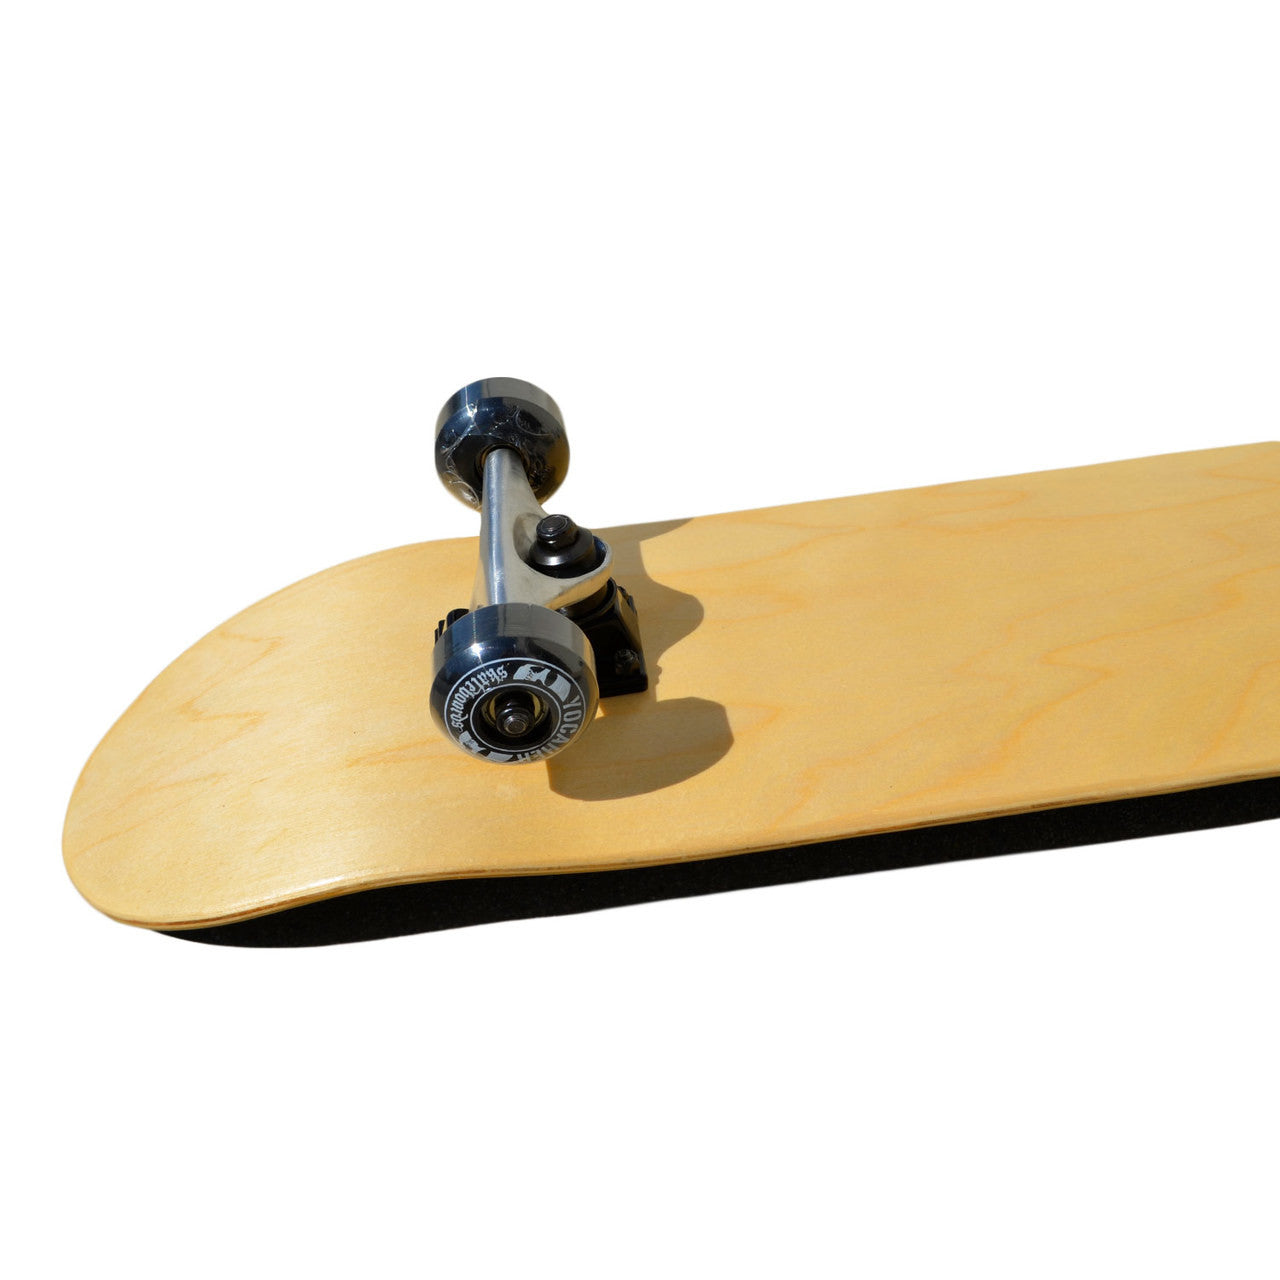 Yocaher Complete Blank Skateboard 7.75" - Natural